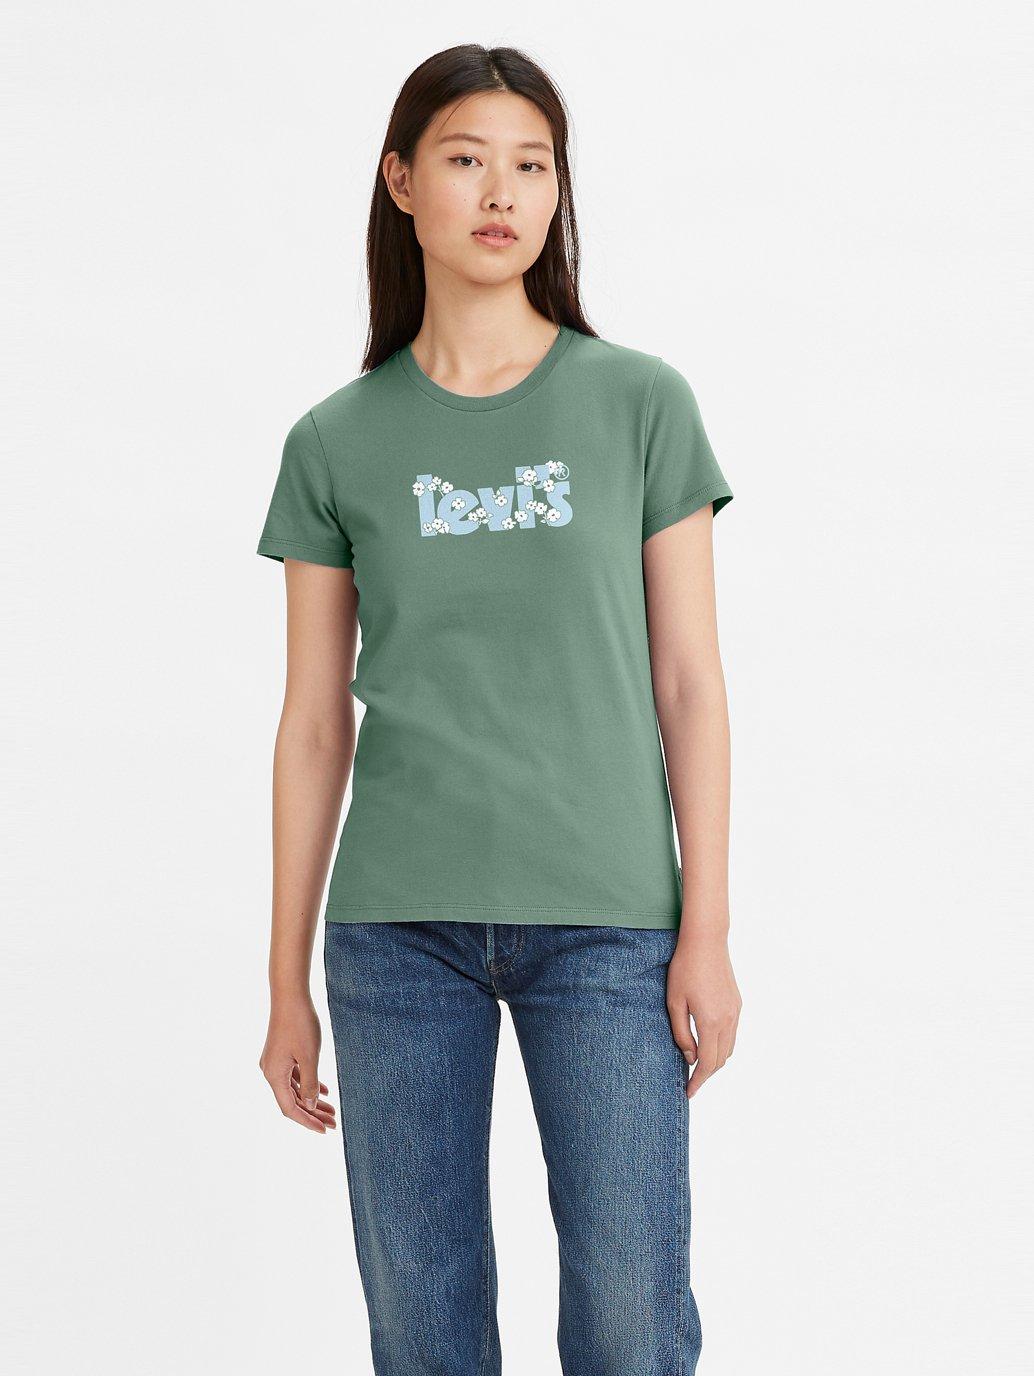 Buy Levi's® Women's Perfect T-Shirt | Levi’s® Official Online Store MY